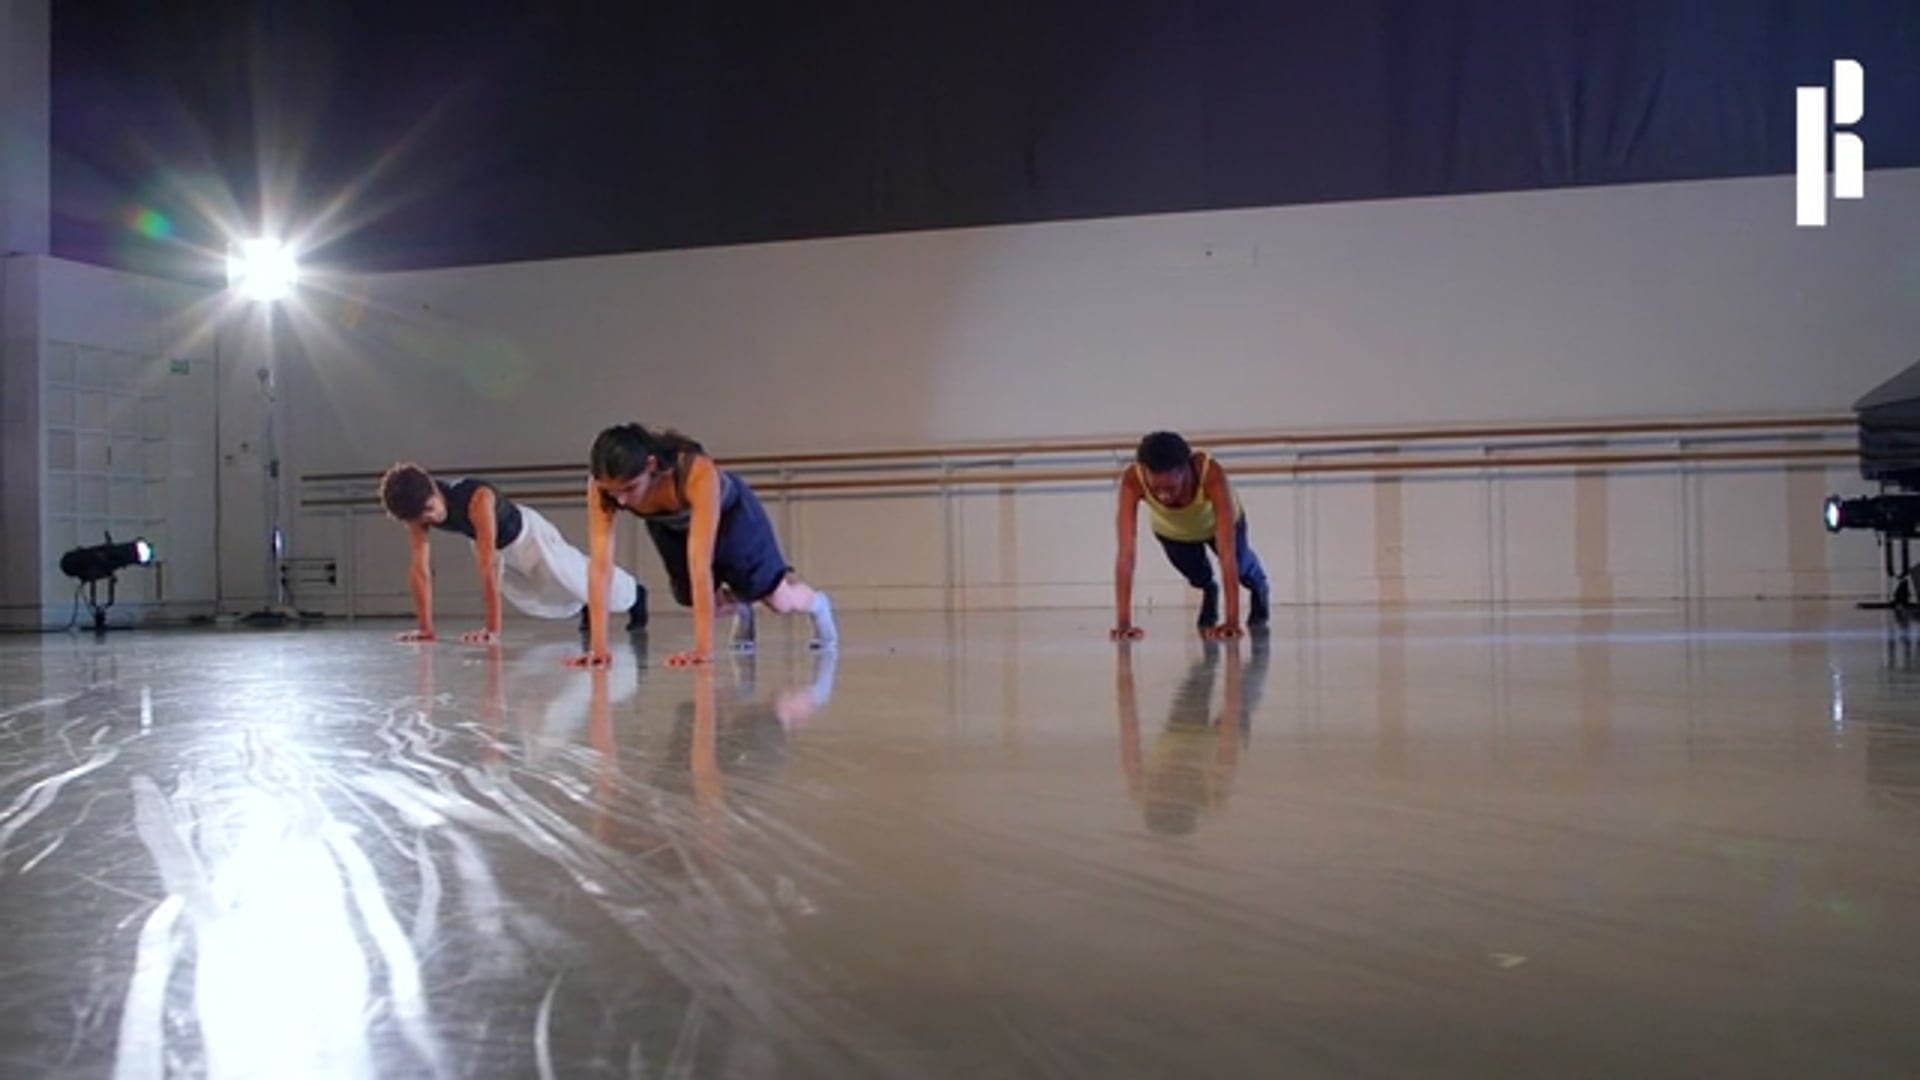 A group of dancers practicing in a dance studio.